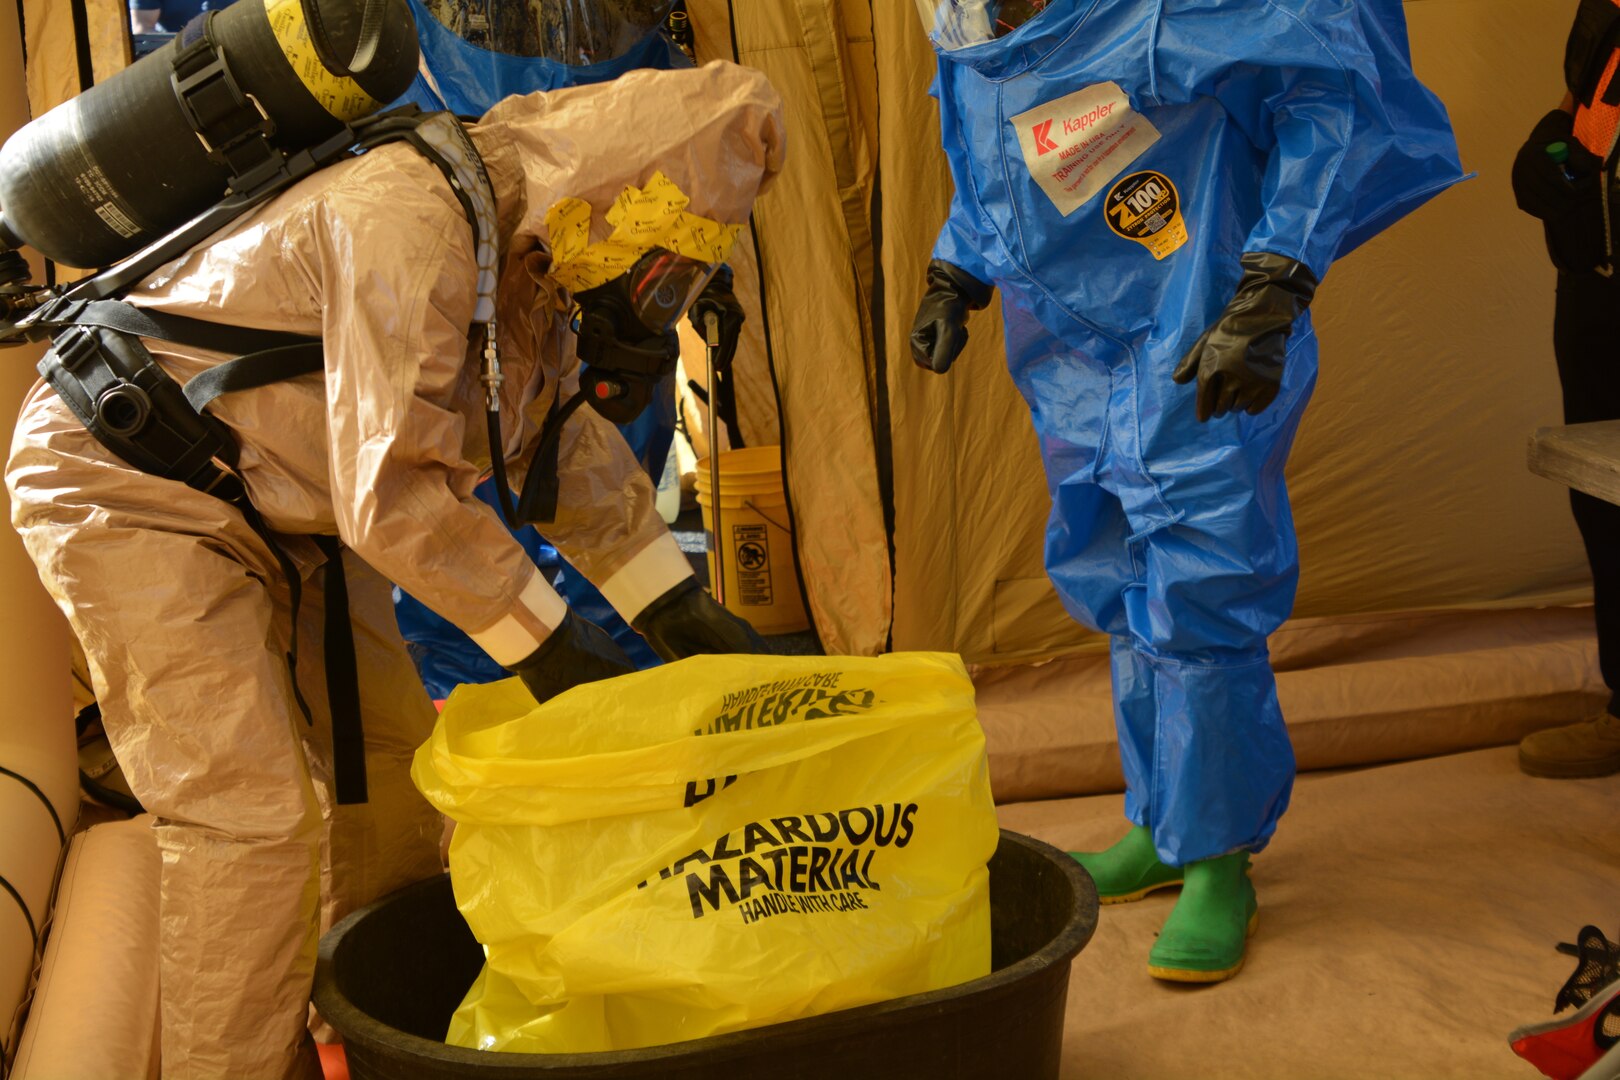 U.S. Army Staff Sgt. Matthew Kauffman works to decontaminate items during the Pennsylvania National Guard’s 3rd Weapons of Mass Destruction Civil Support Team evaluation exercise Oct. 25 at Steam Town National Historic Park, Scranton, Pennsylvania. The team was evaluated by U.S. Army North on its ability to identify nuclear, radiological, chemical and biological contaminants, advise on response measures and assist with requests for support during notional training scenarios.